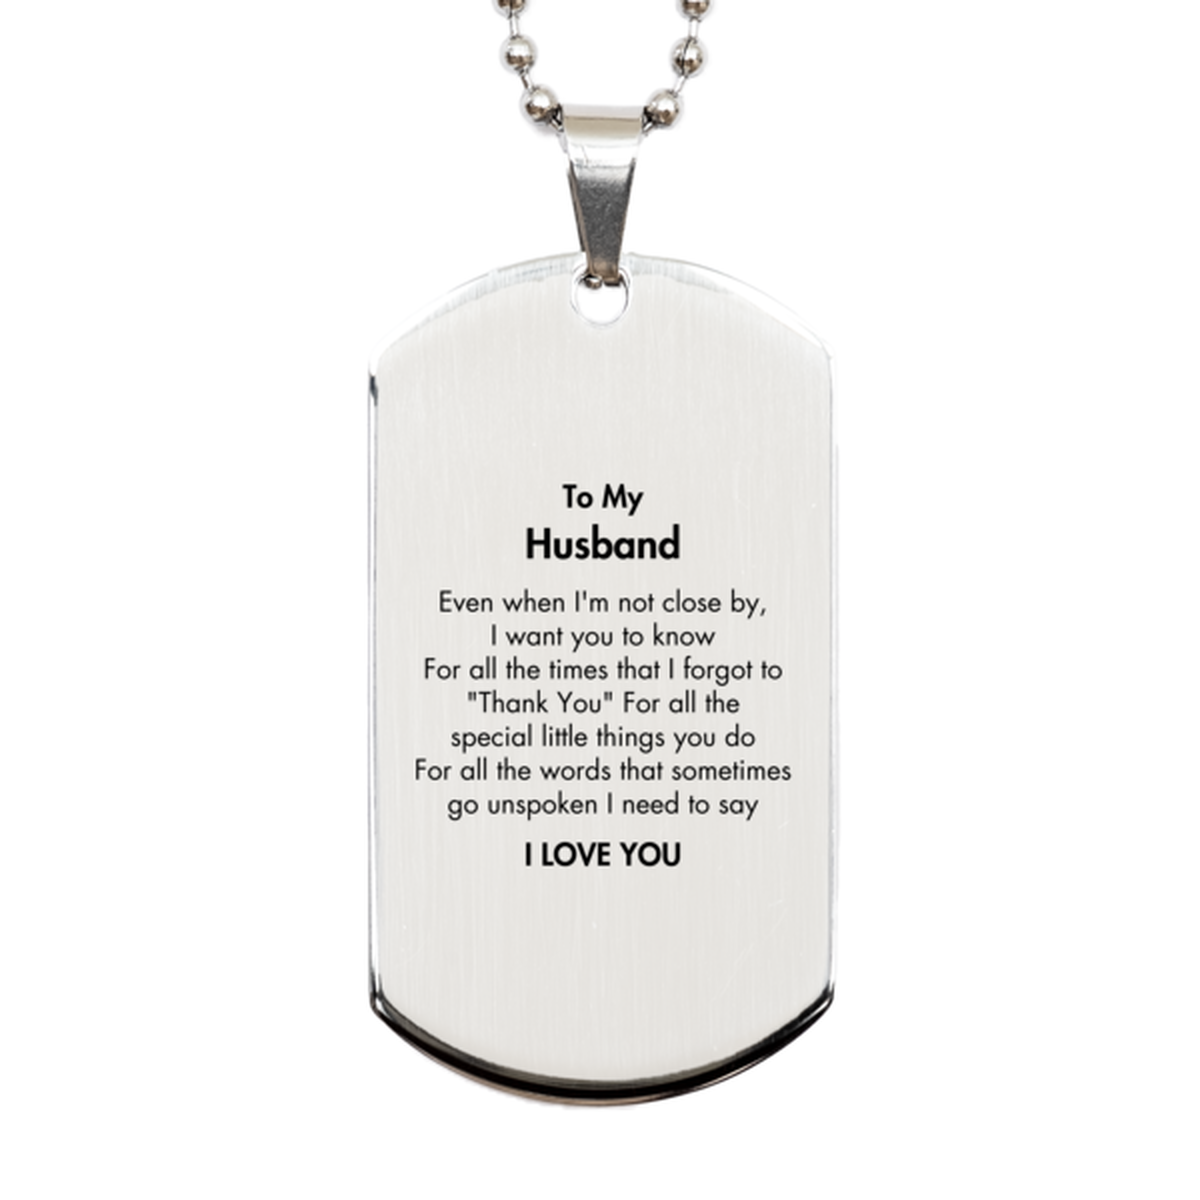 Thank You Gifts for Husband, Keepsake Silver Dog Tag Gifts for Husband Birthday Mother's day Father's Day Husband For all the words That sometimes go unspoken I need to say I LOVE YOU